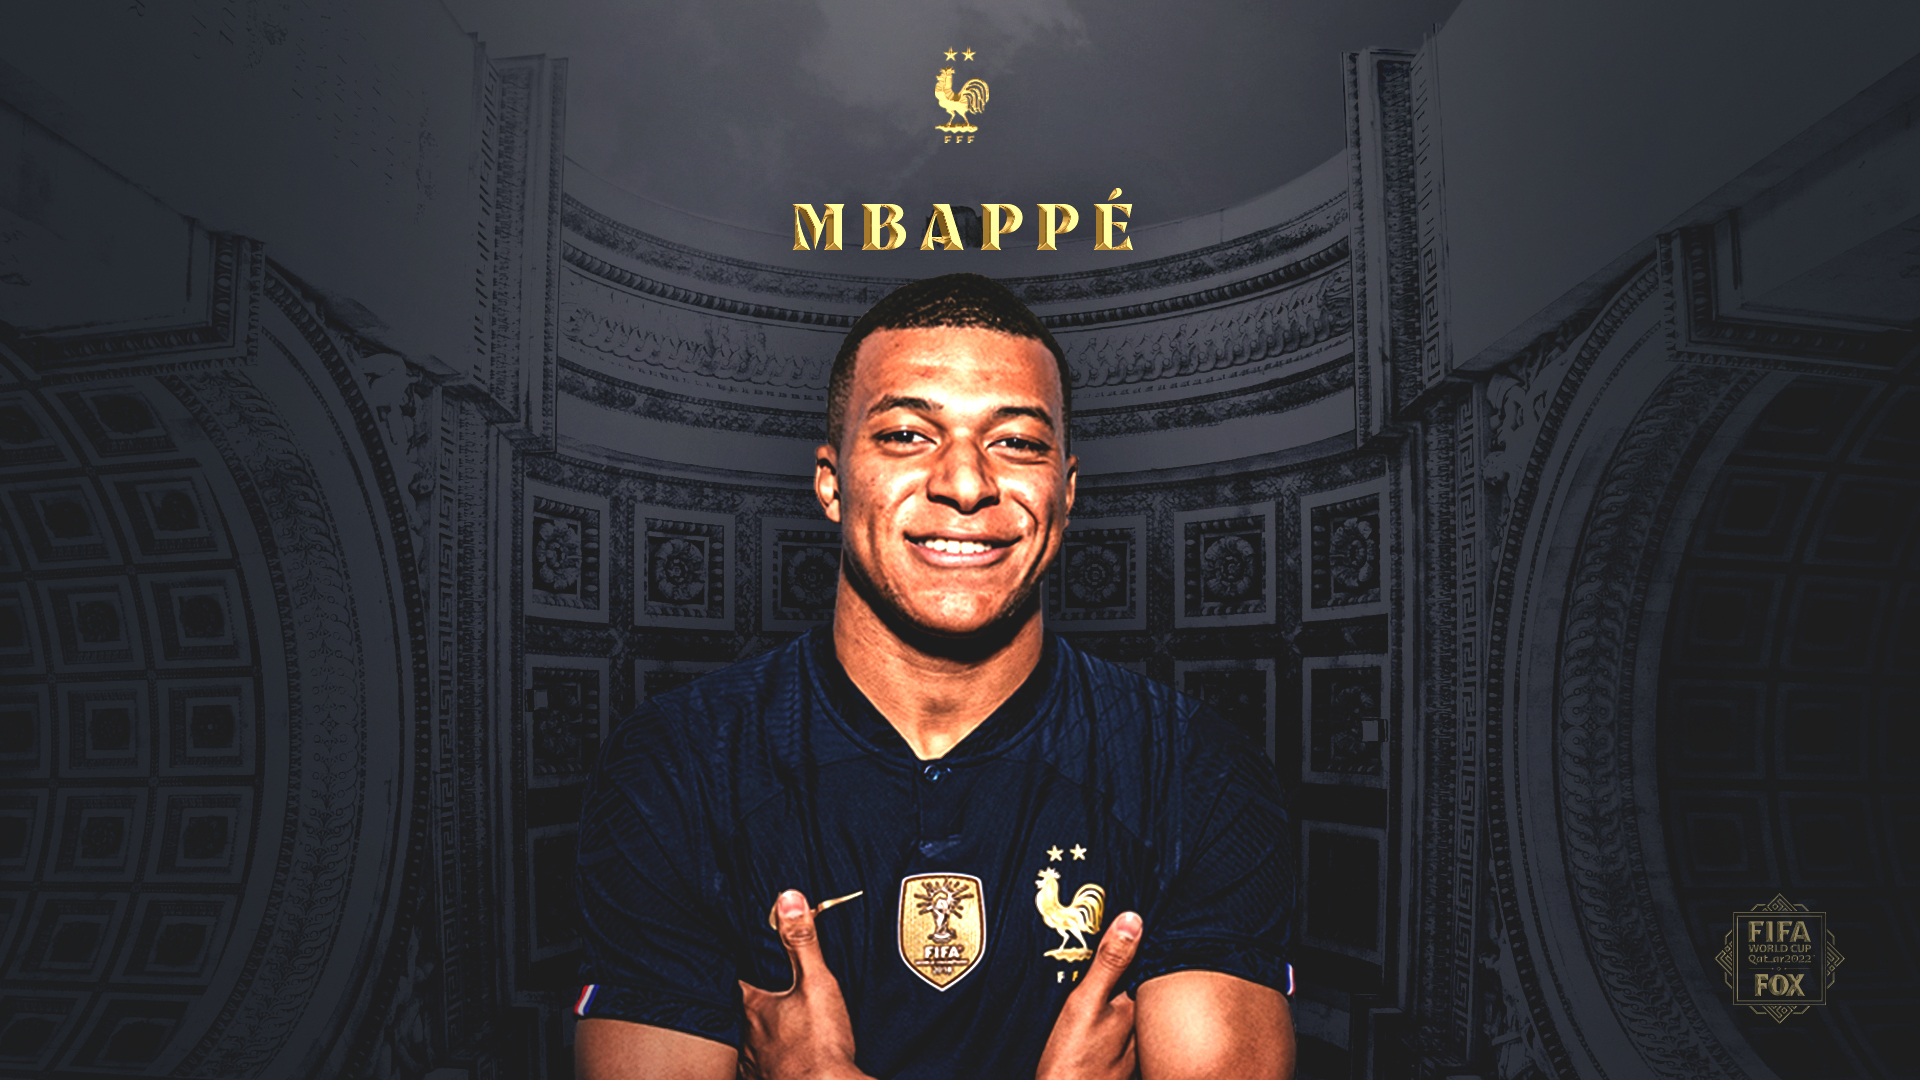 'The new Pelé' Kylian Mbappé is about to face his greatest challenge yet